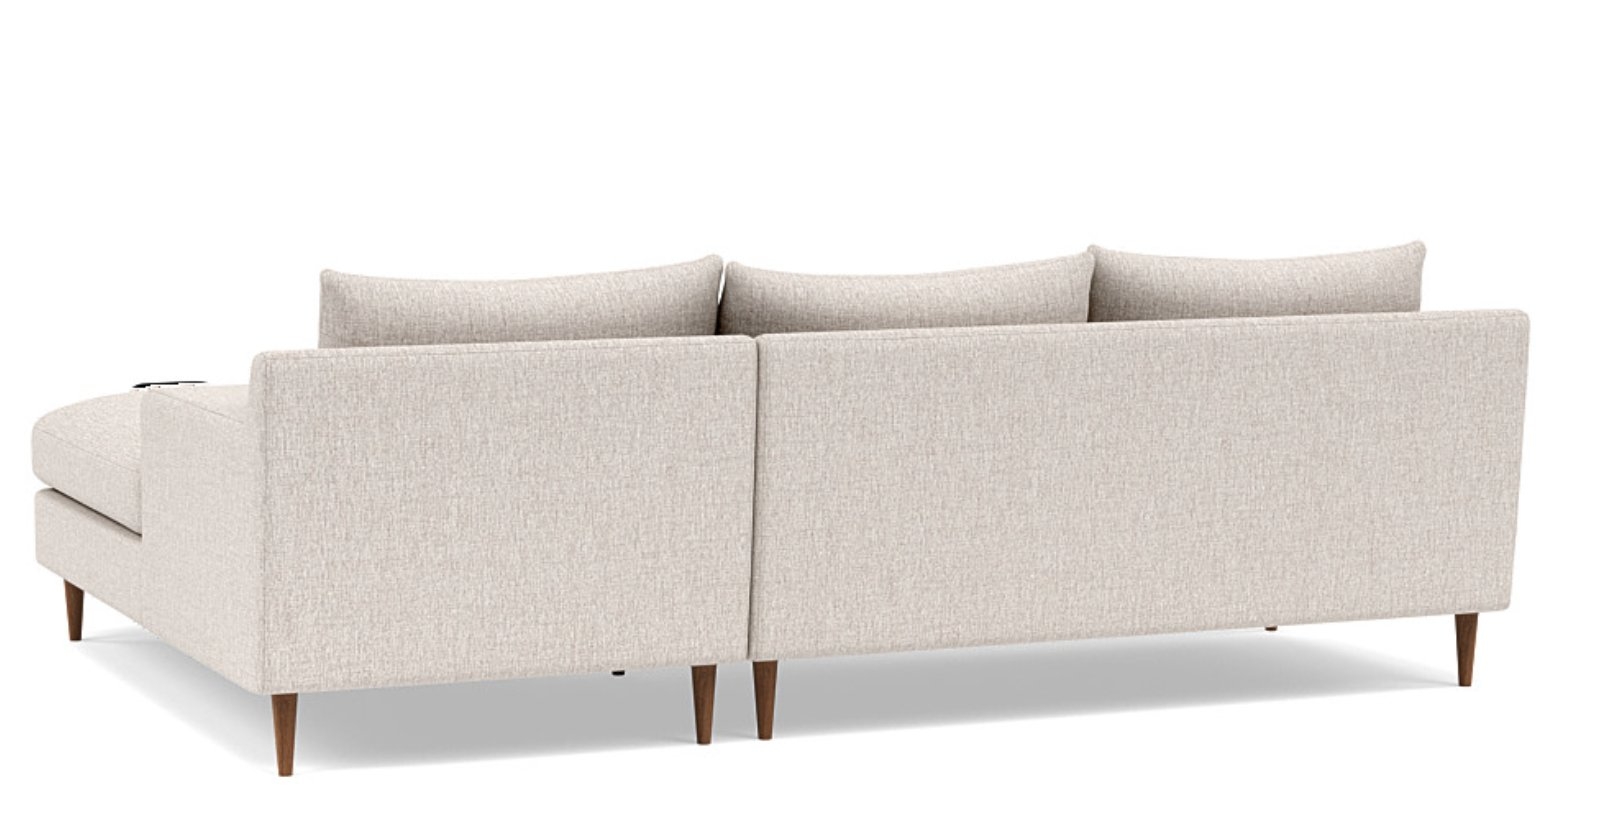 Sloan Right Chaise Sectional, 120" - Image 3